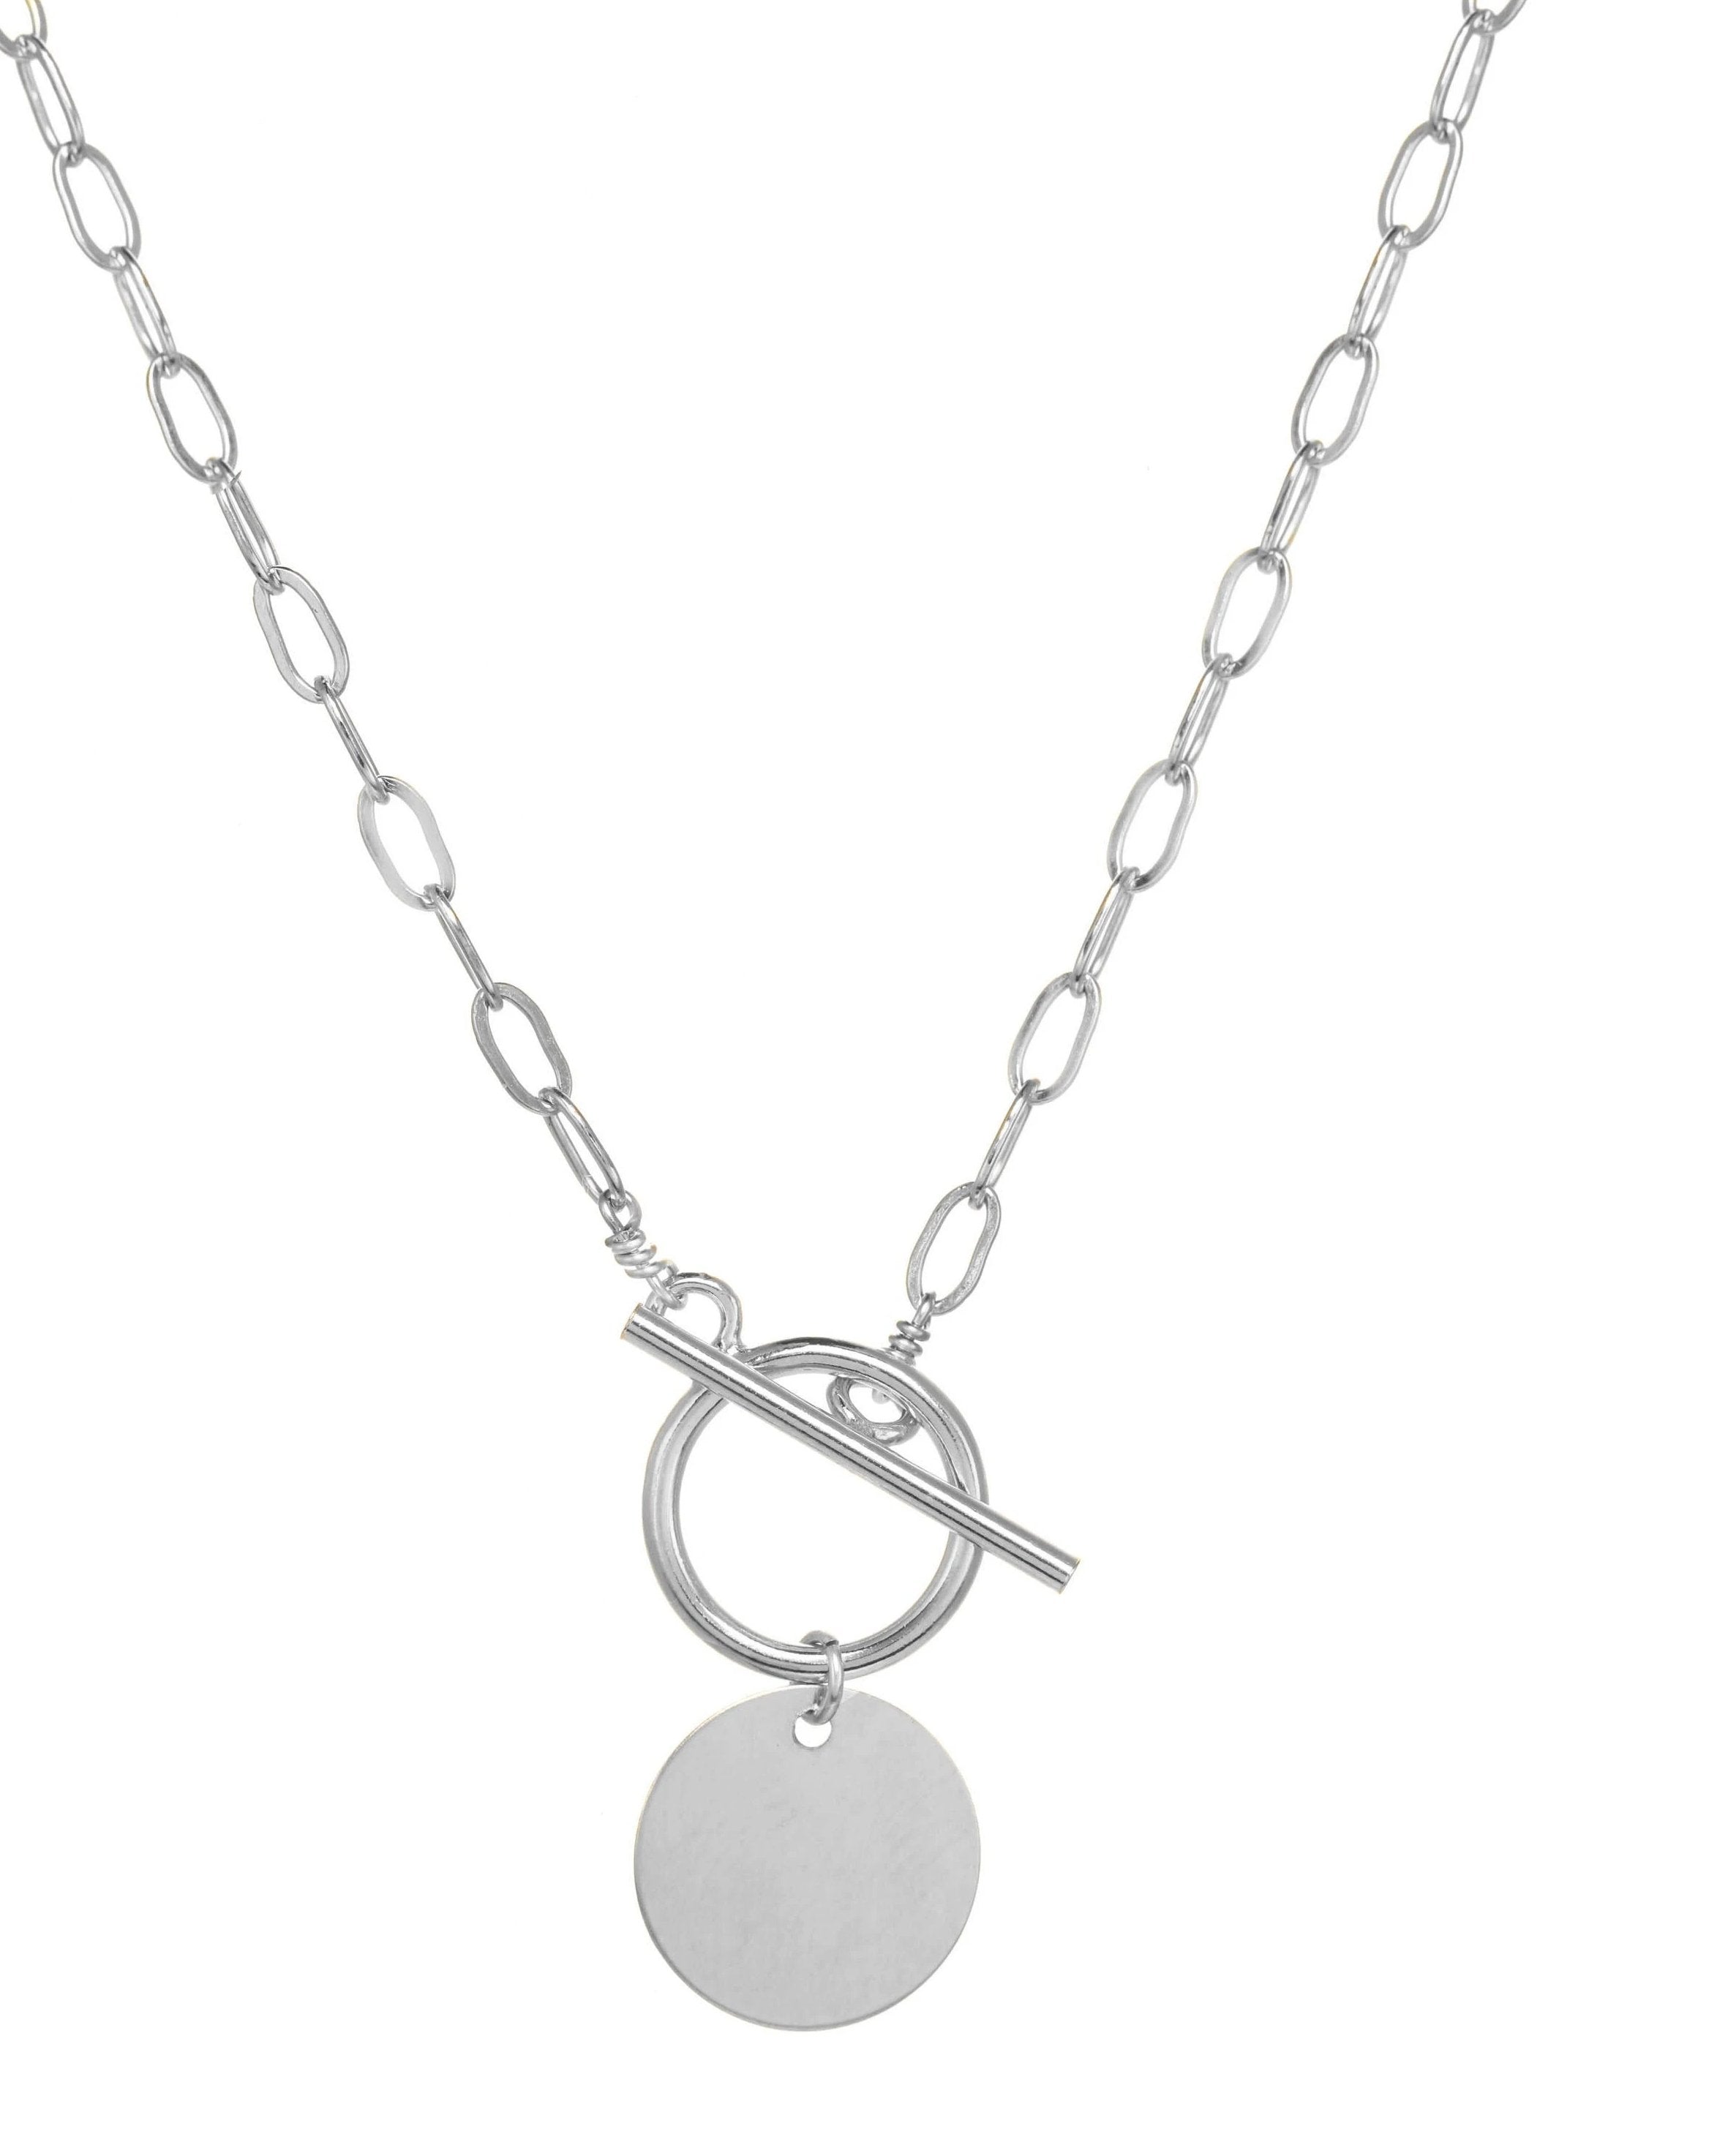 Cappa Necklace by KOZAKH. A 16 to 18 inch adjustable length necklace in Sterling Silver, featuring a coin charm.